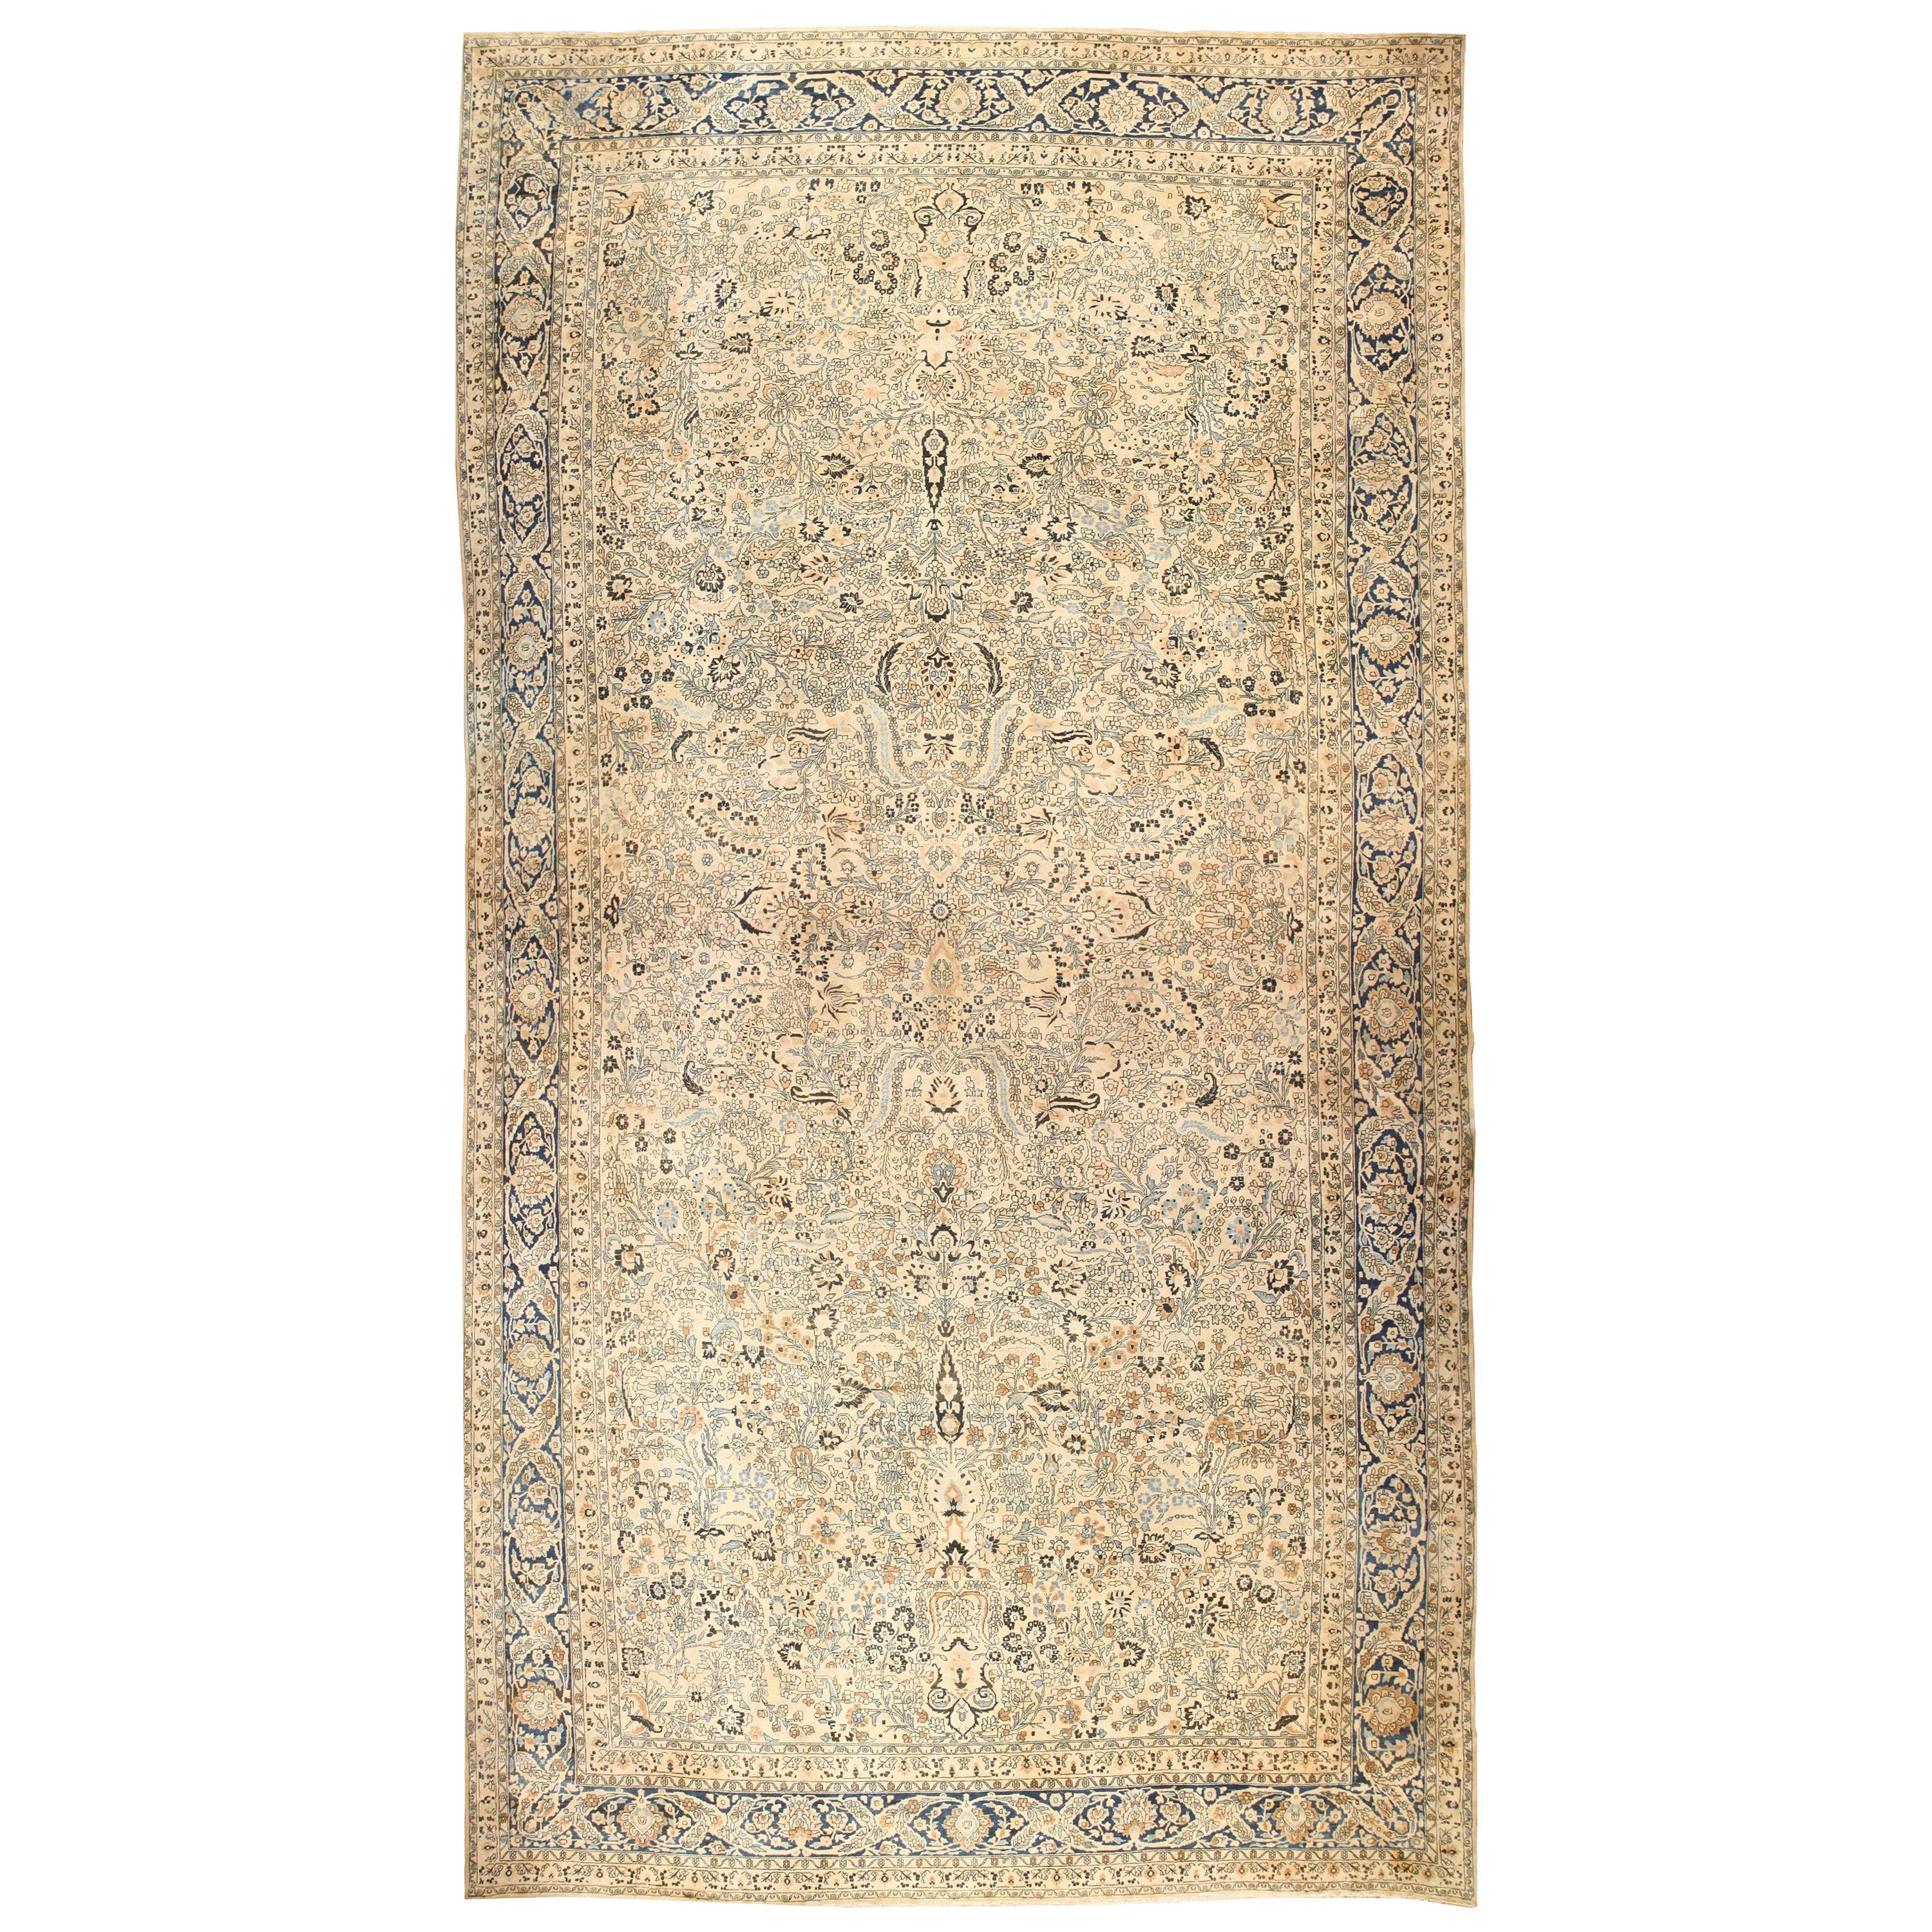 Antique Persian Khorassan Rug. Size: 14 ft 4 in x 28 ft For Sale